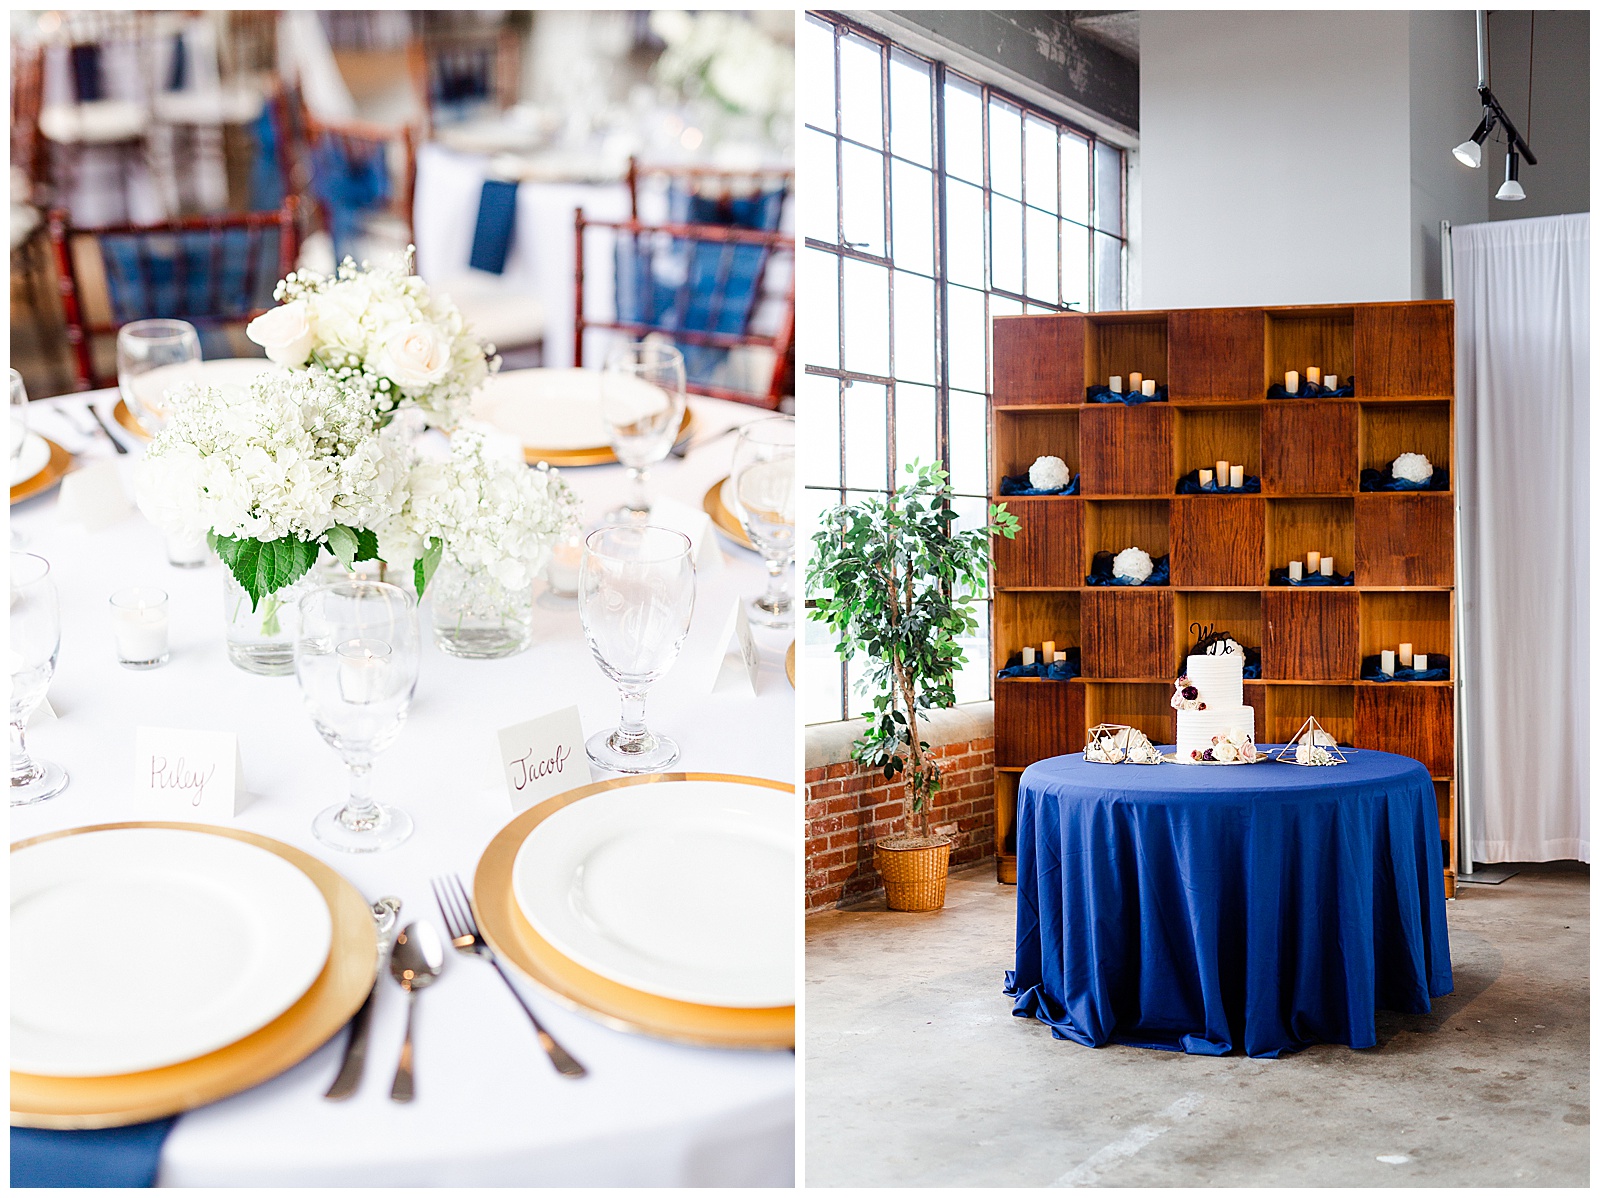 Simple white table setting at Gorgeous Rustic Airy Indoor Wedding Venue from Navy Blue and Gold-Themed Elegant Modern Summer Wedding in Charlotte, NC | check out the full wedding at KevynDixonPhoto.com